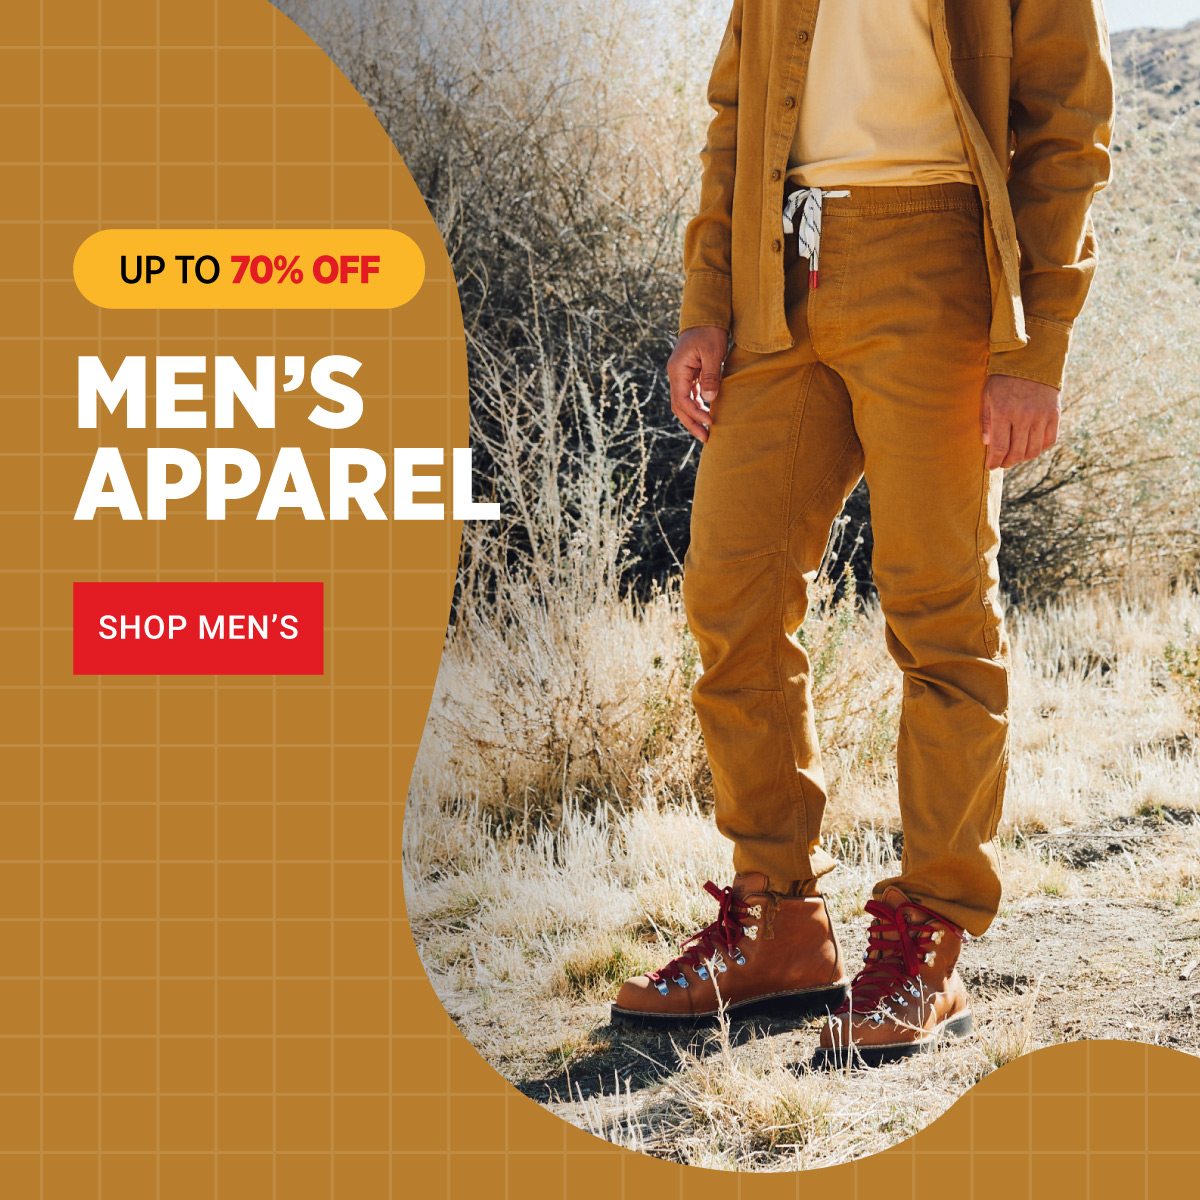 UP TO 70% OFF MEN'S APPAREL